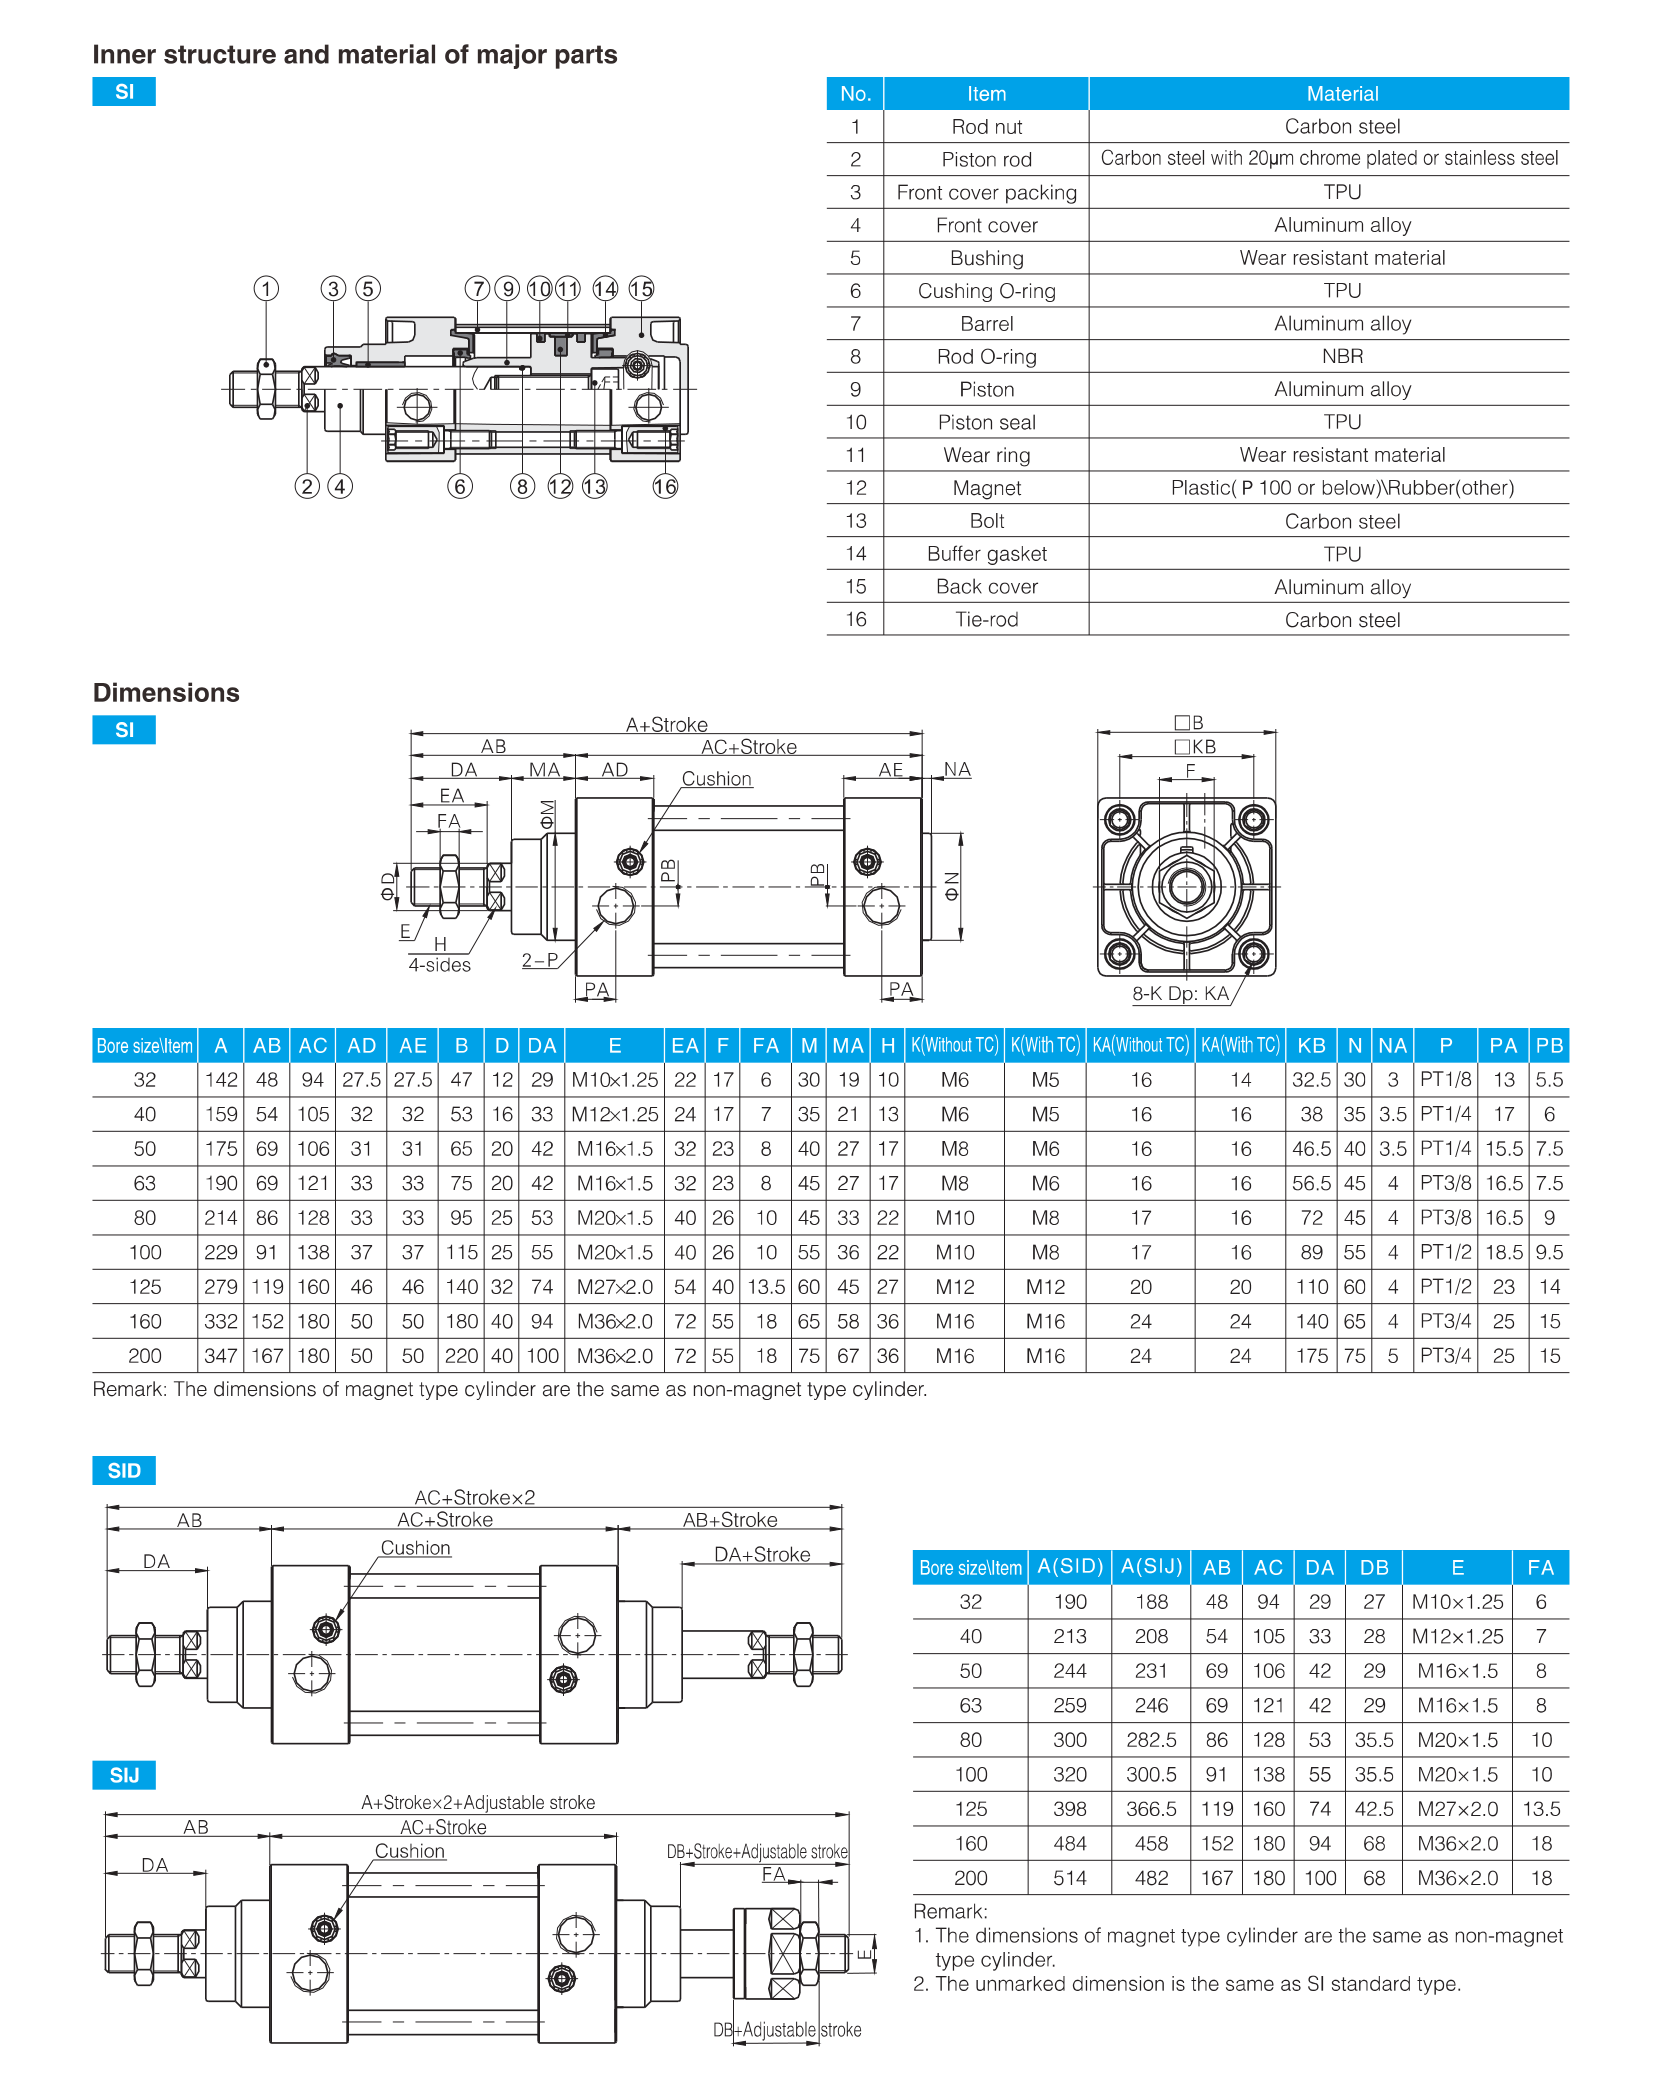 SI Series ISO15552 Standard Cylinder